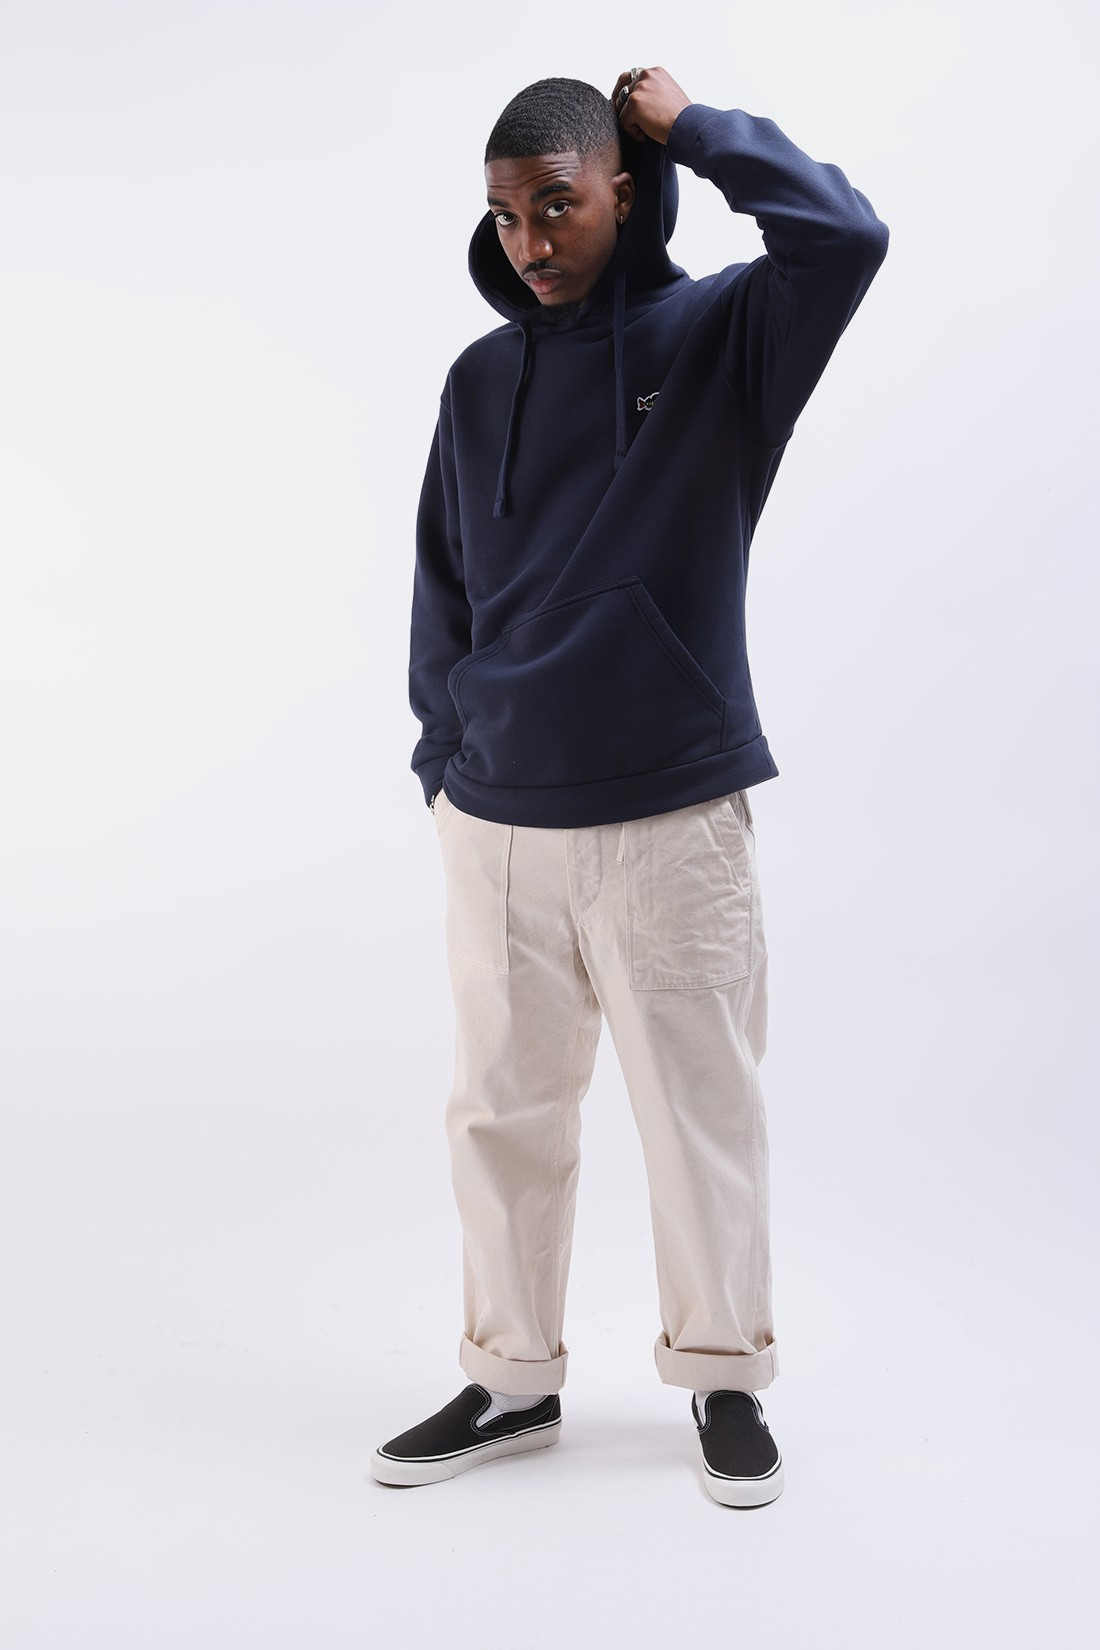 STAY HUNGRY SPORTS / Aborre hoodie Navy